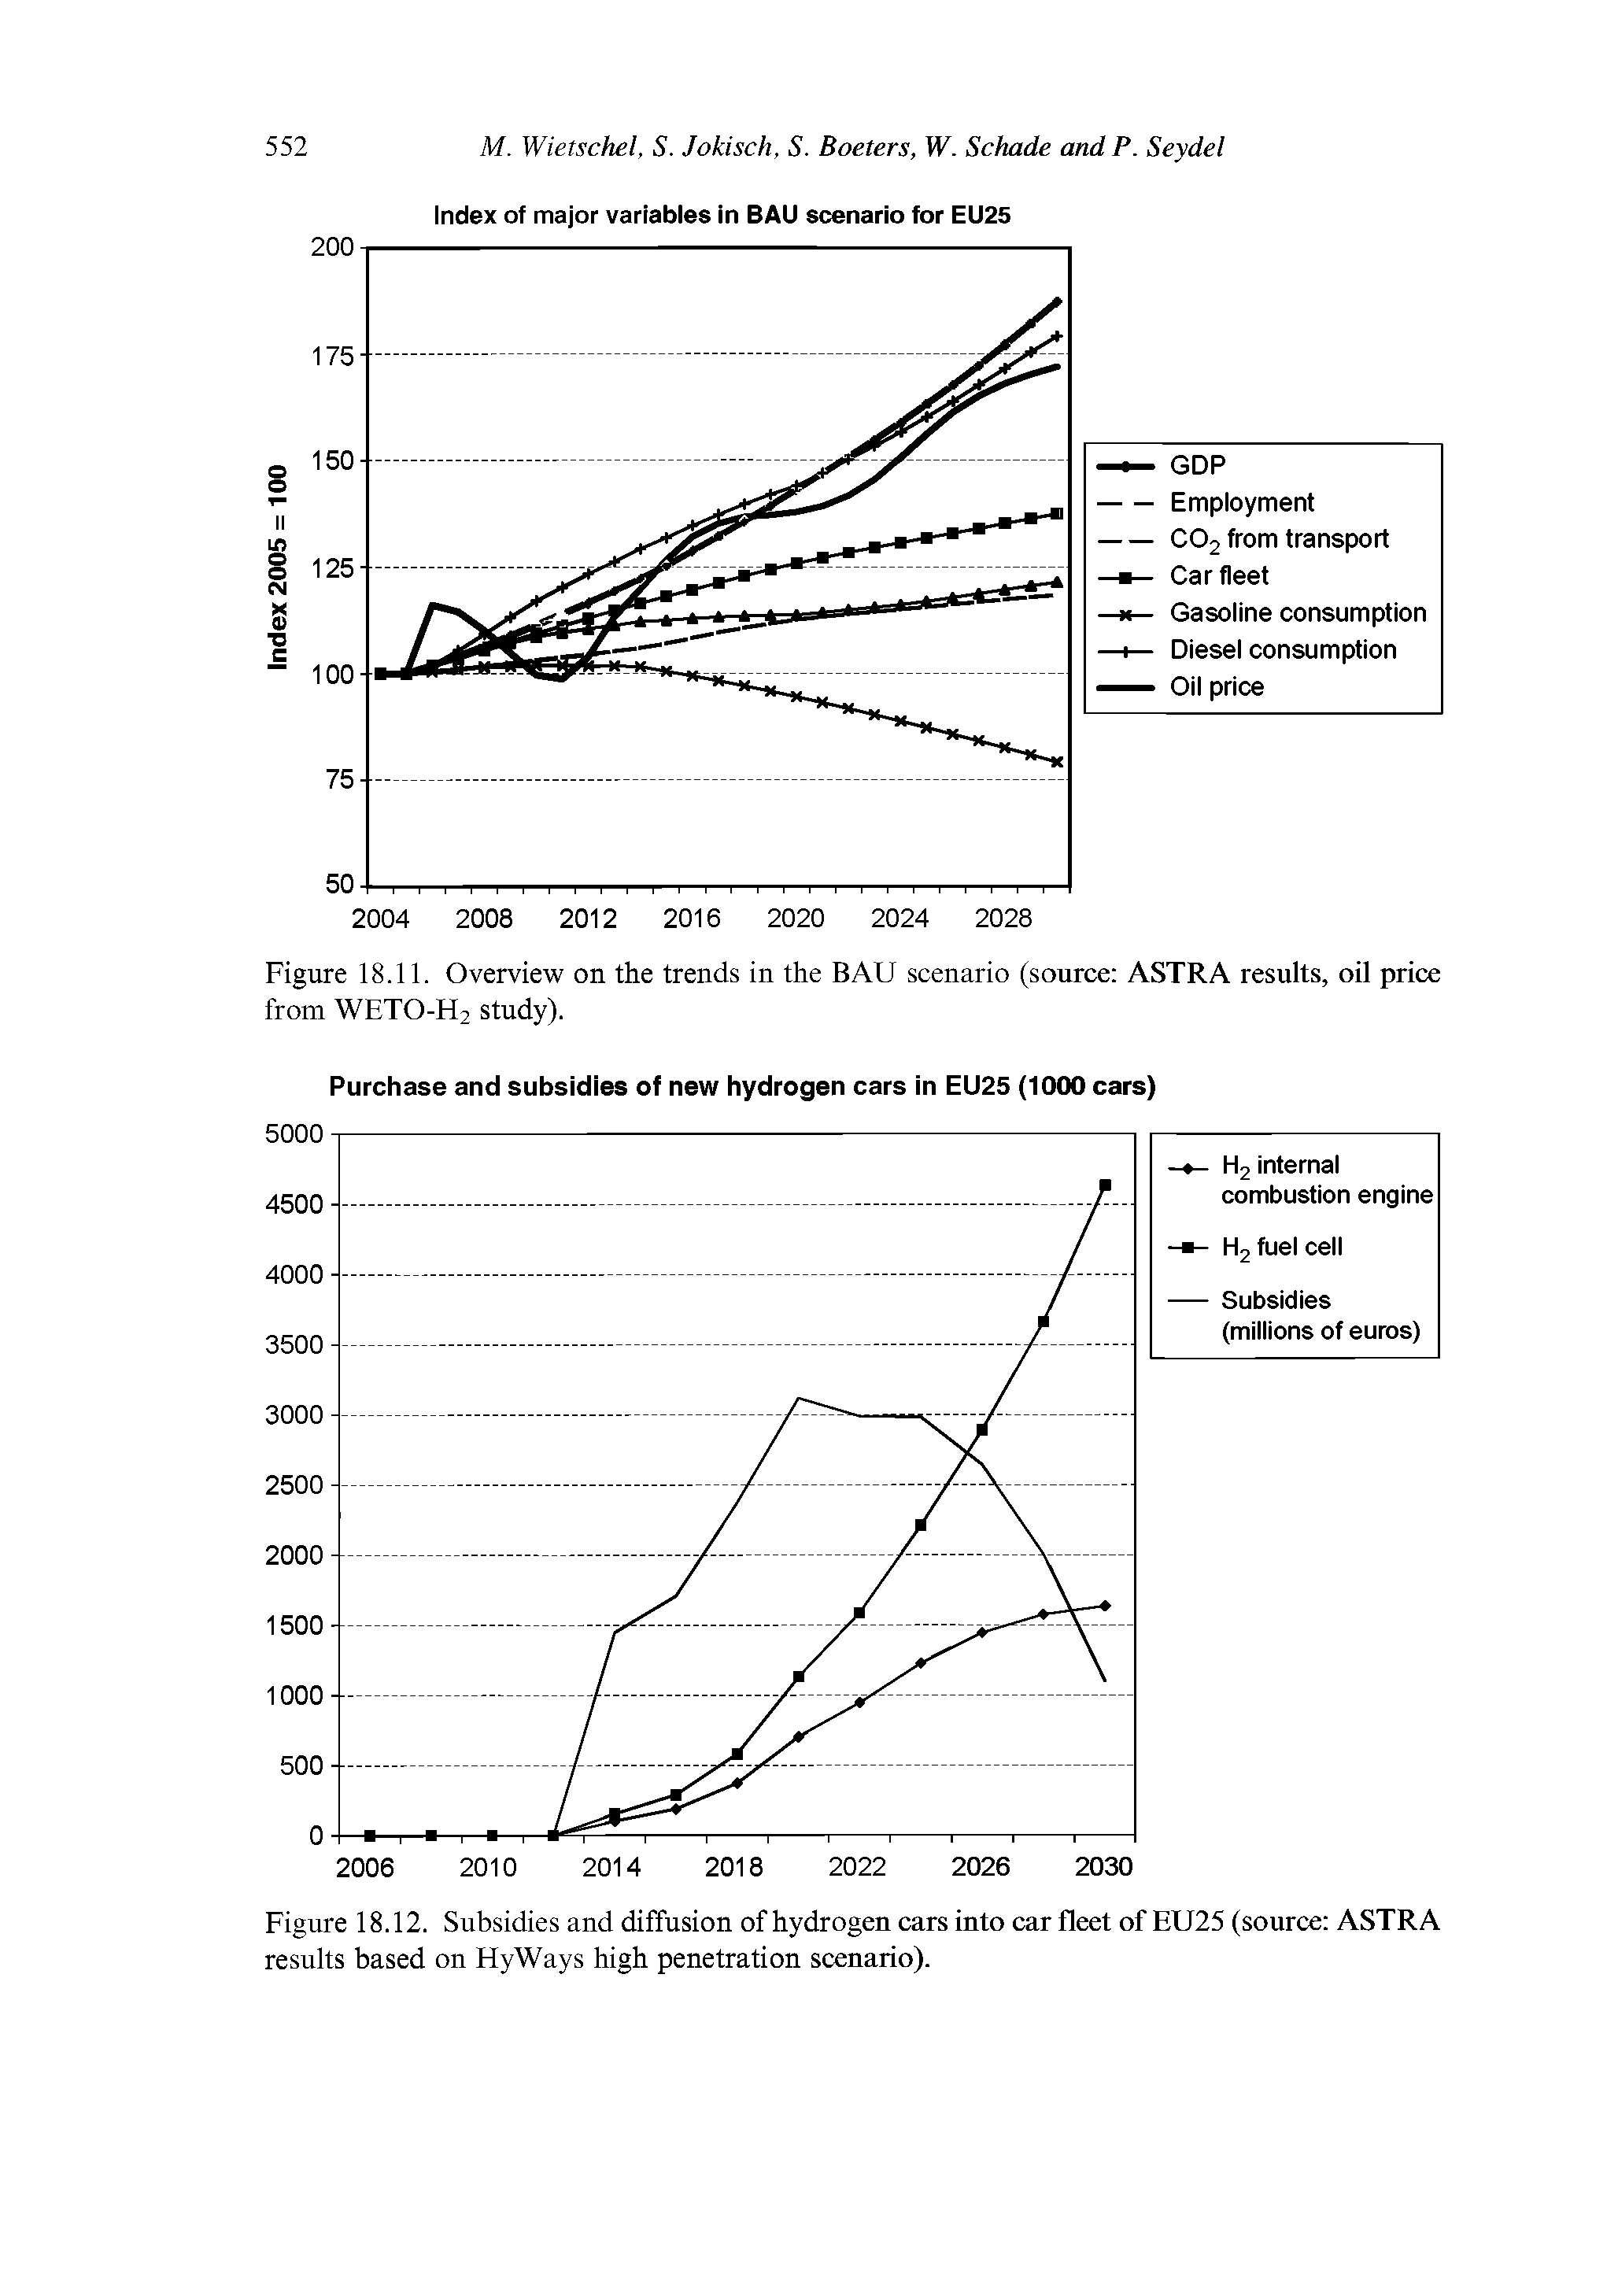 Figure 18.12. Subsidies and diffusion of hydrogen cars into car fleet of EU25 (source ASTRA results based on ElyWays high penetration scenario).